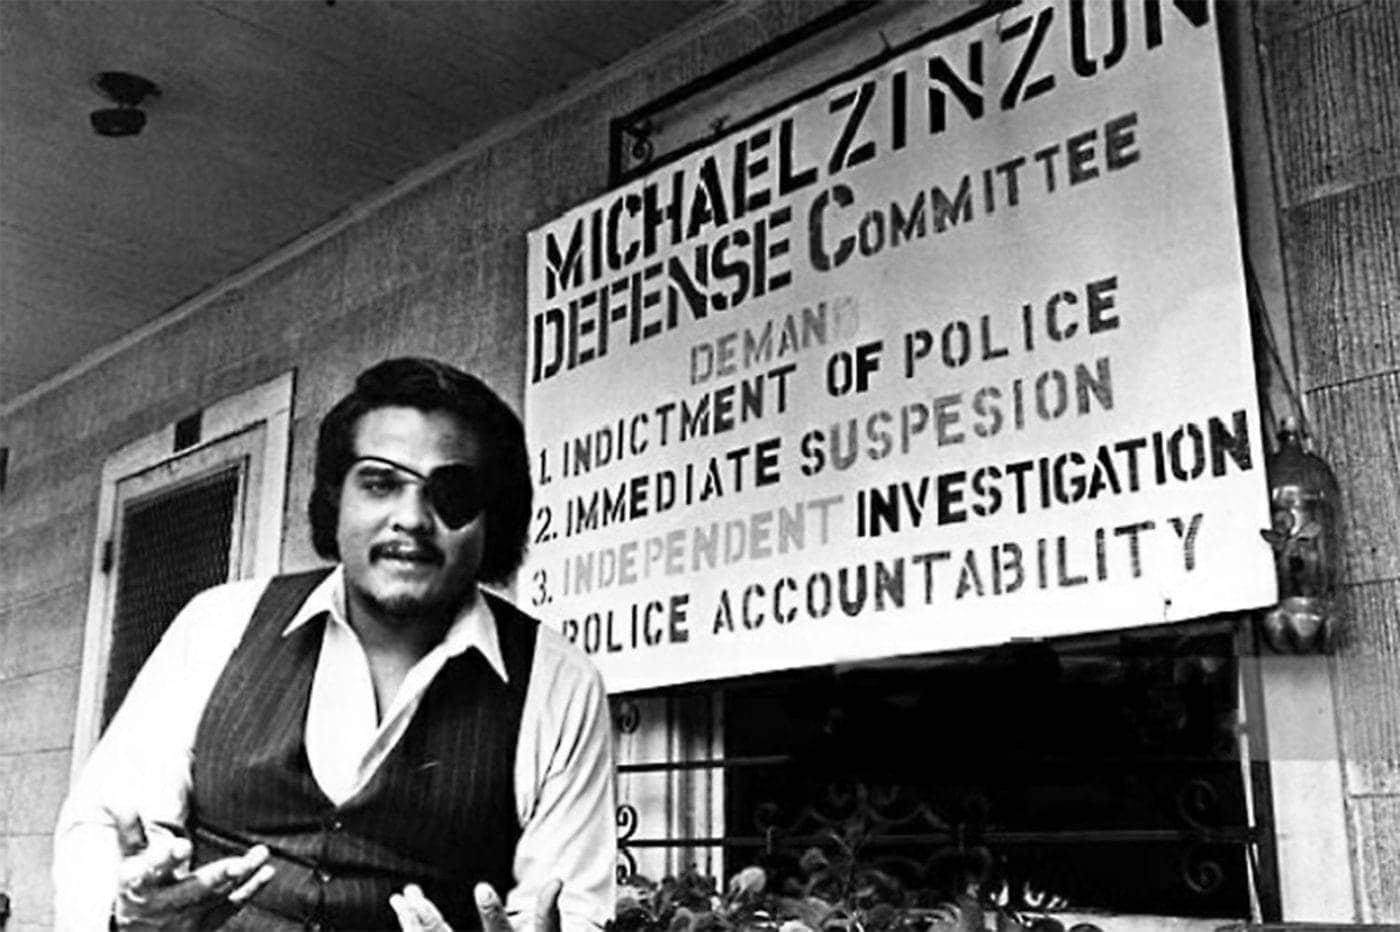 Michael-Zinzun-Defense-Committee-Black-Panther-Party-Pasadena-1400x932, Filmmaker Dennis Haywood’s ‘Zinzun: A Revolutionary Activist’ doc is a must-see at this Year’s SF Black Film Fest, Culture Currents 